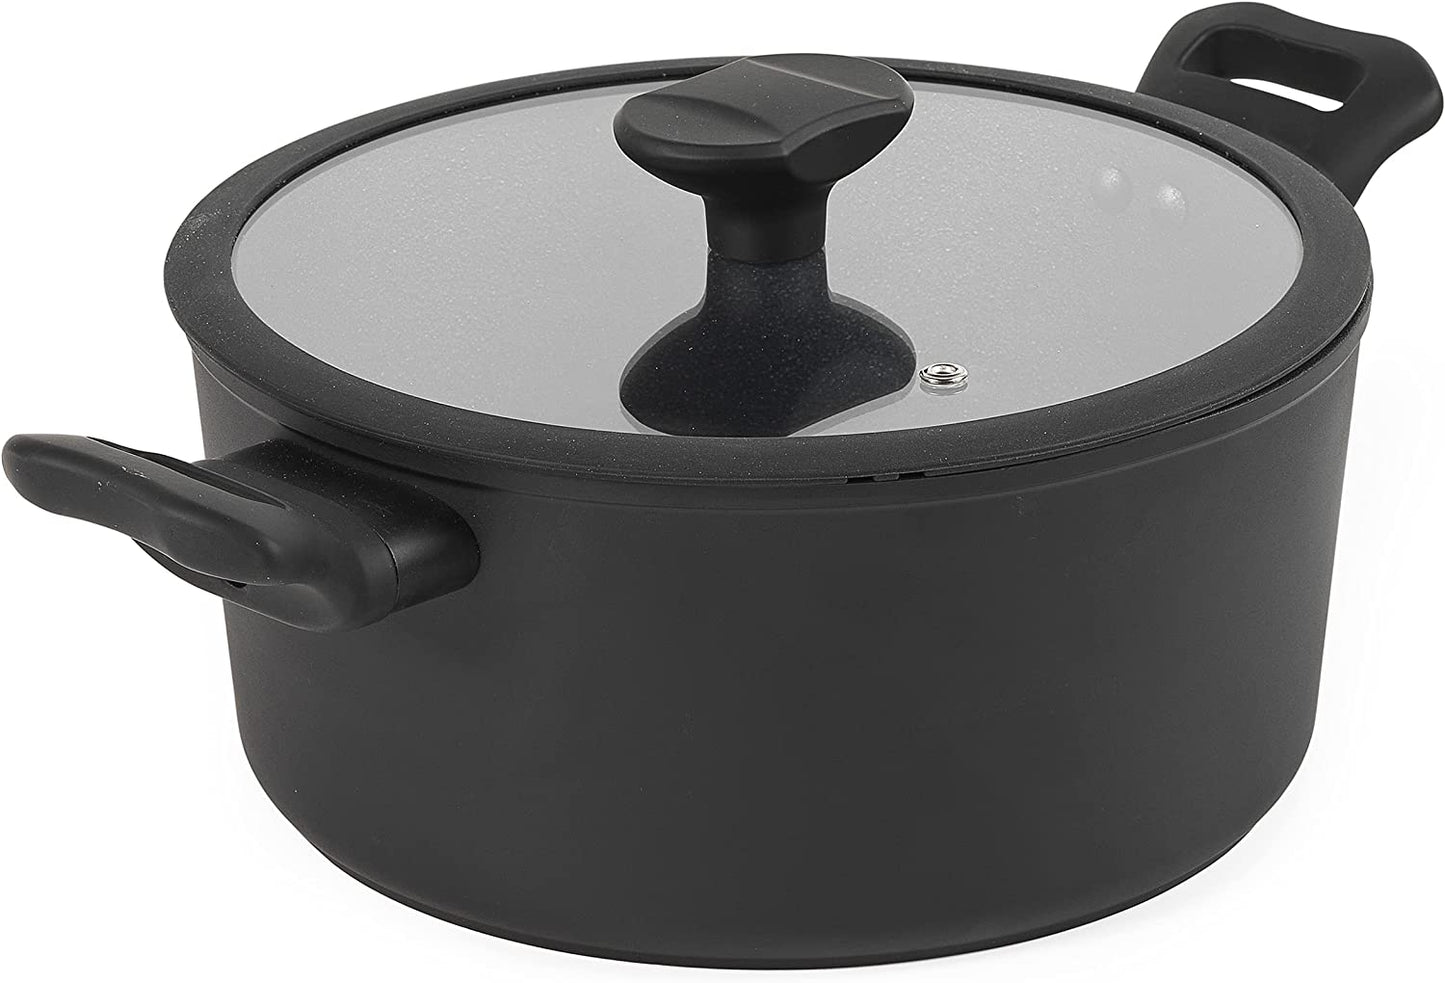 Tall pot with non-stick coating, Russell Hobbs RH01863EU7 Crystaltech, 20cm